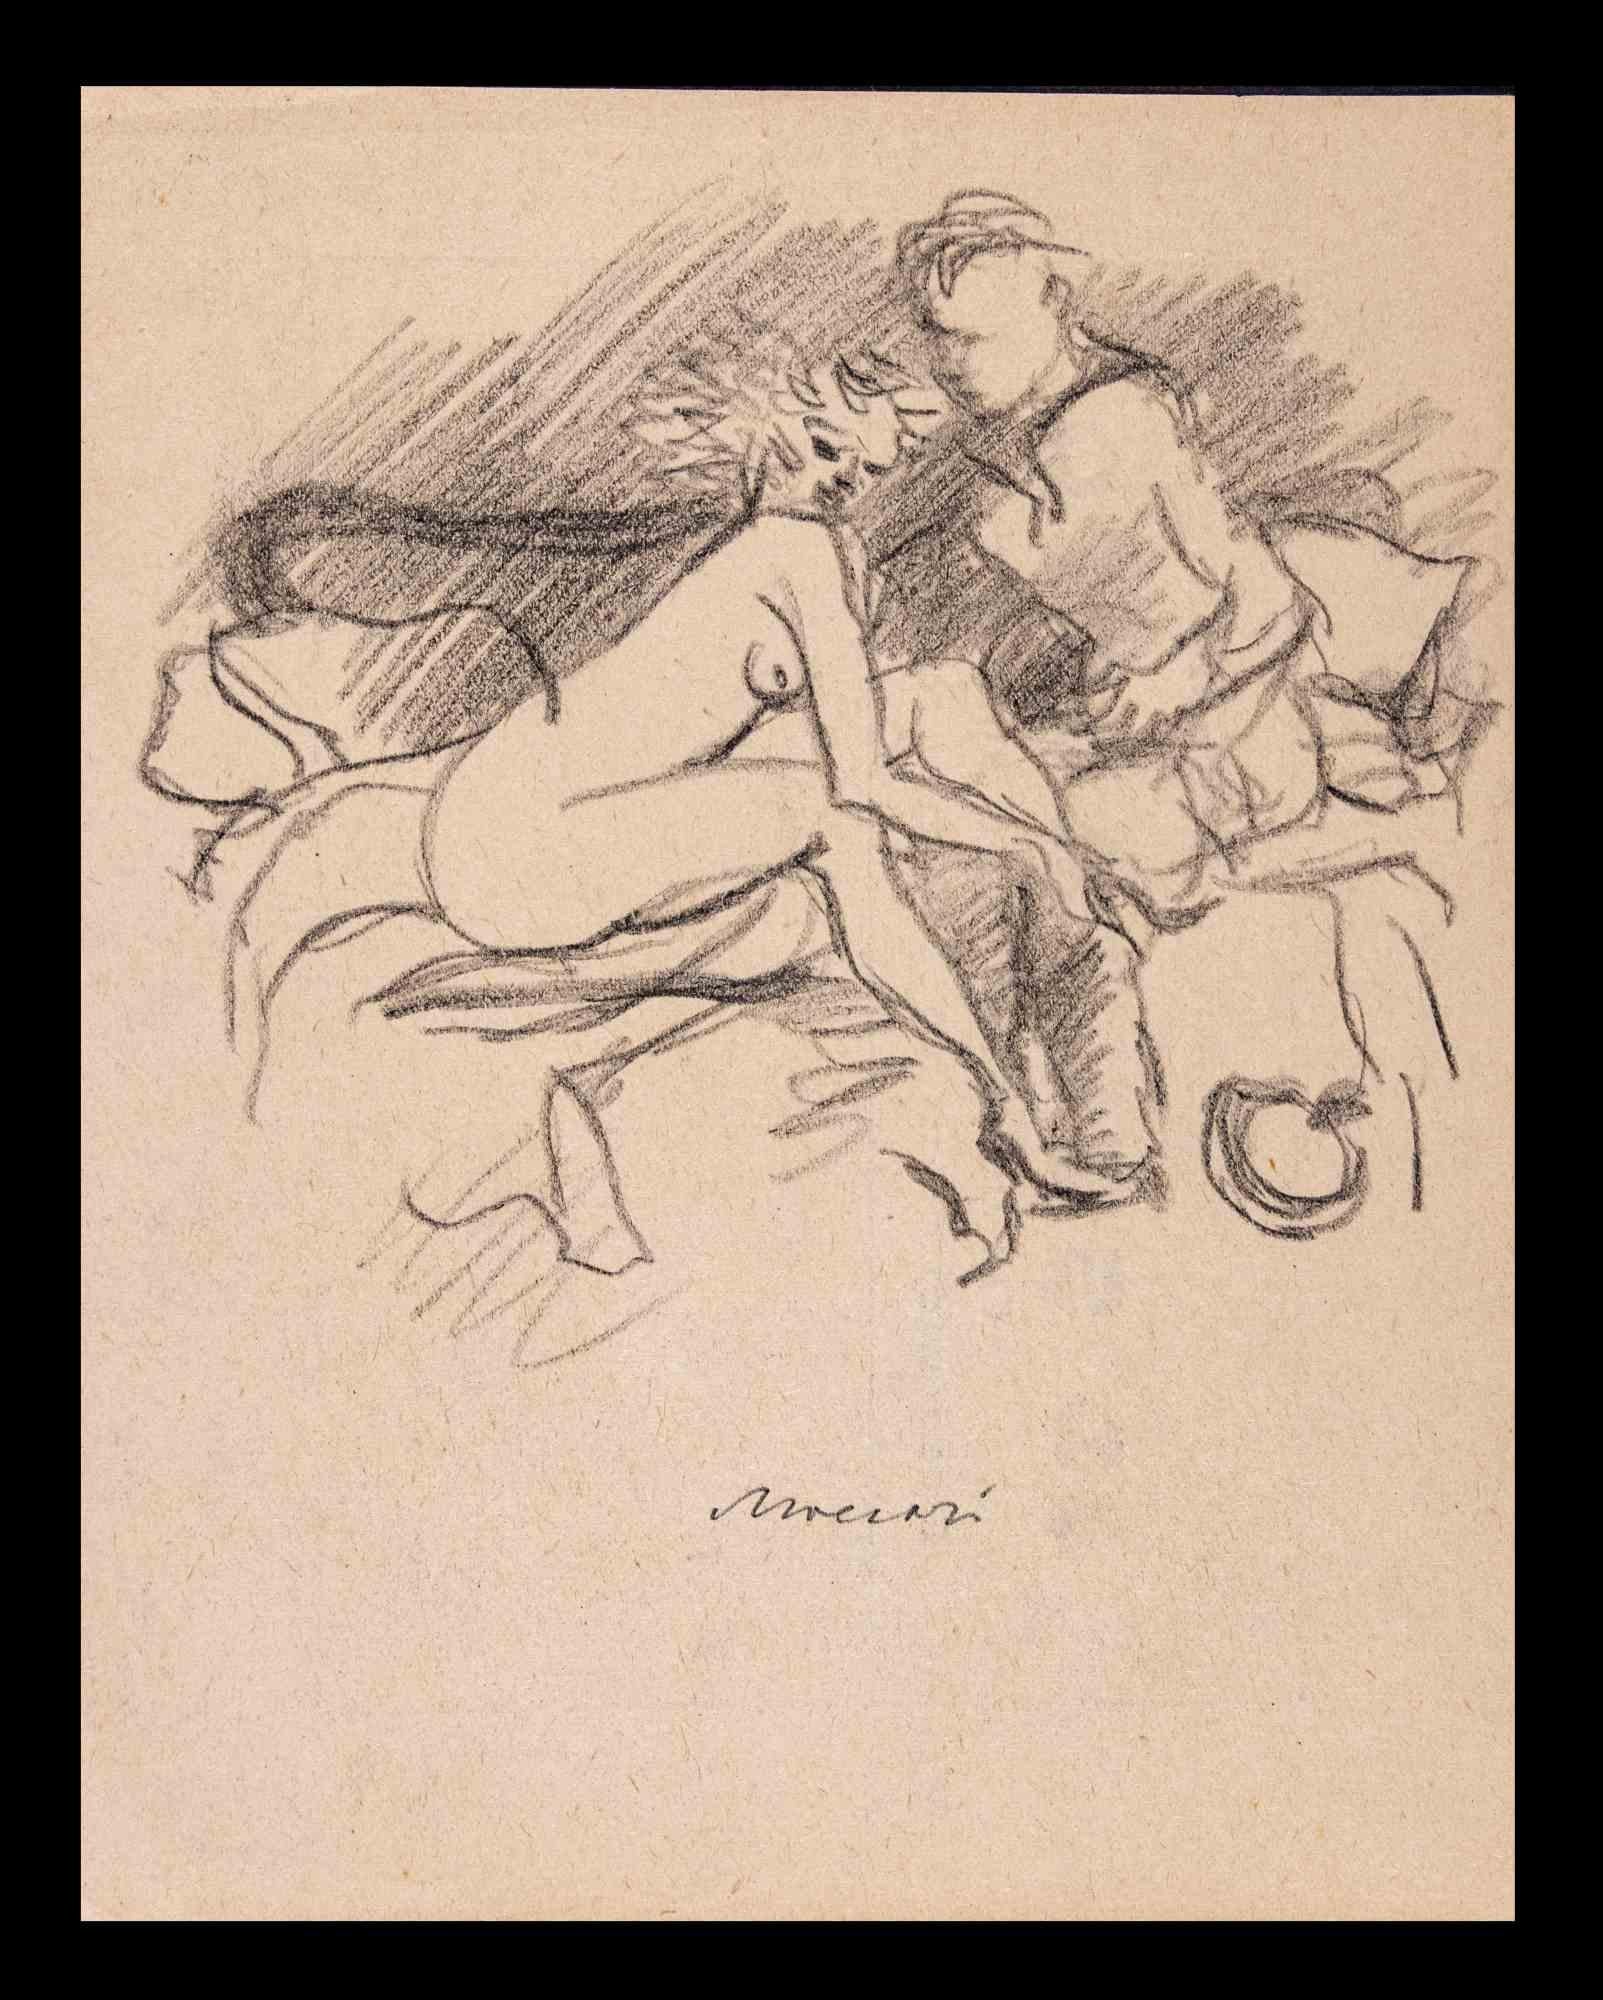 The Couple on the Bed is a Pencil Drawing realized by Mino Maccari  (1924-1989) in 1960s.

Hand-signed on the lower margin.

Good condition on a little yellowed paper.

Mino Maccari (Siena, 1924-Rome, June 16, 1989) was an Italian writer, painter,